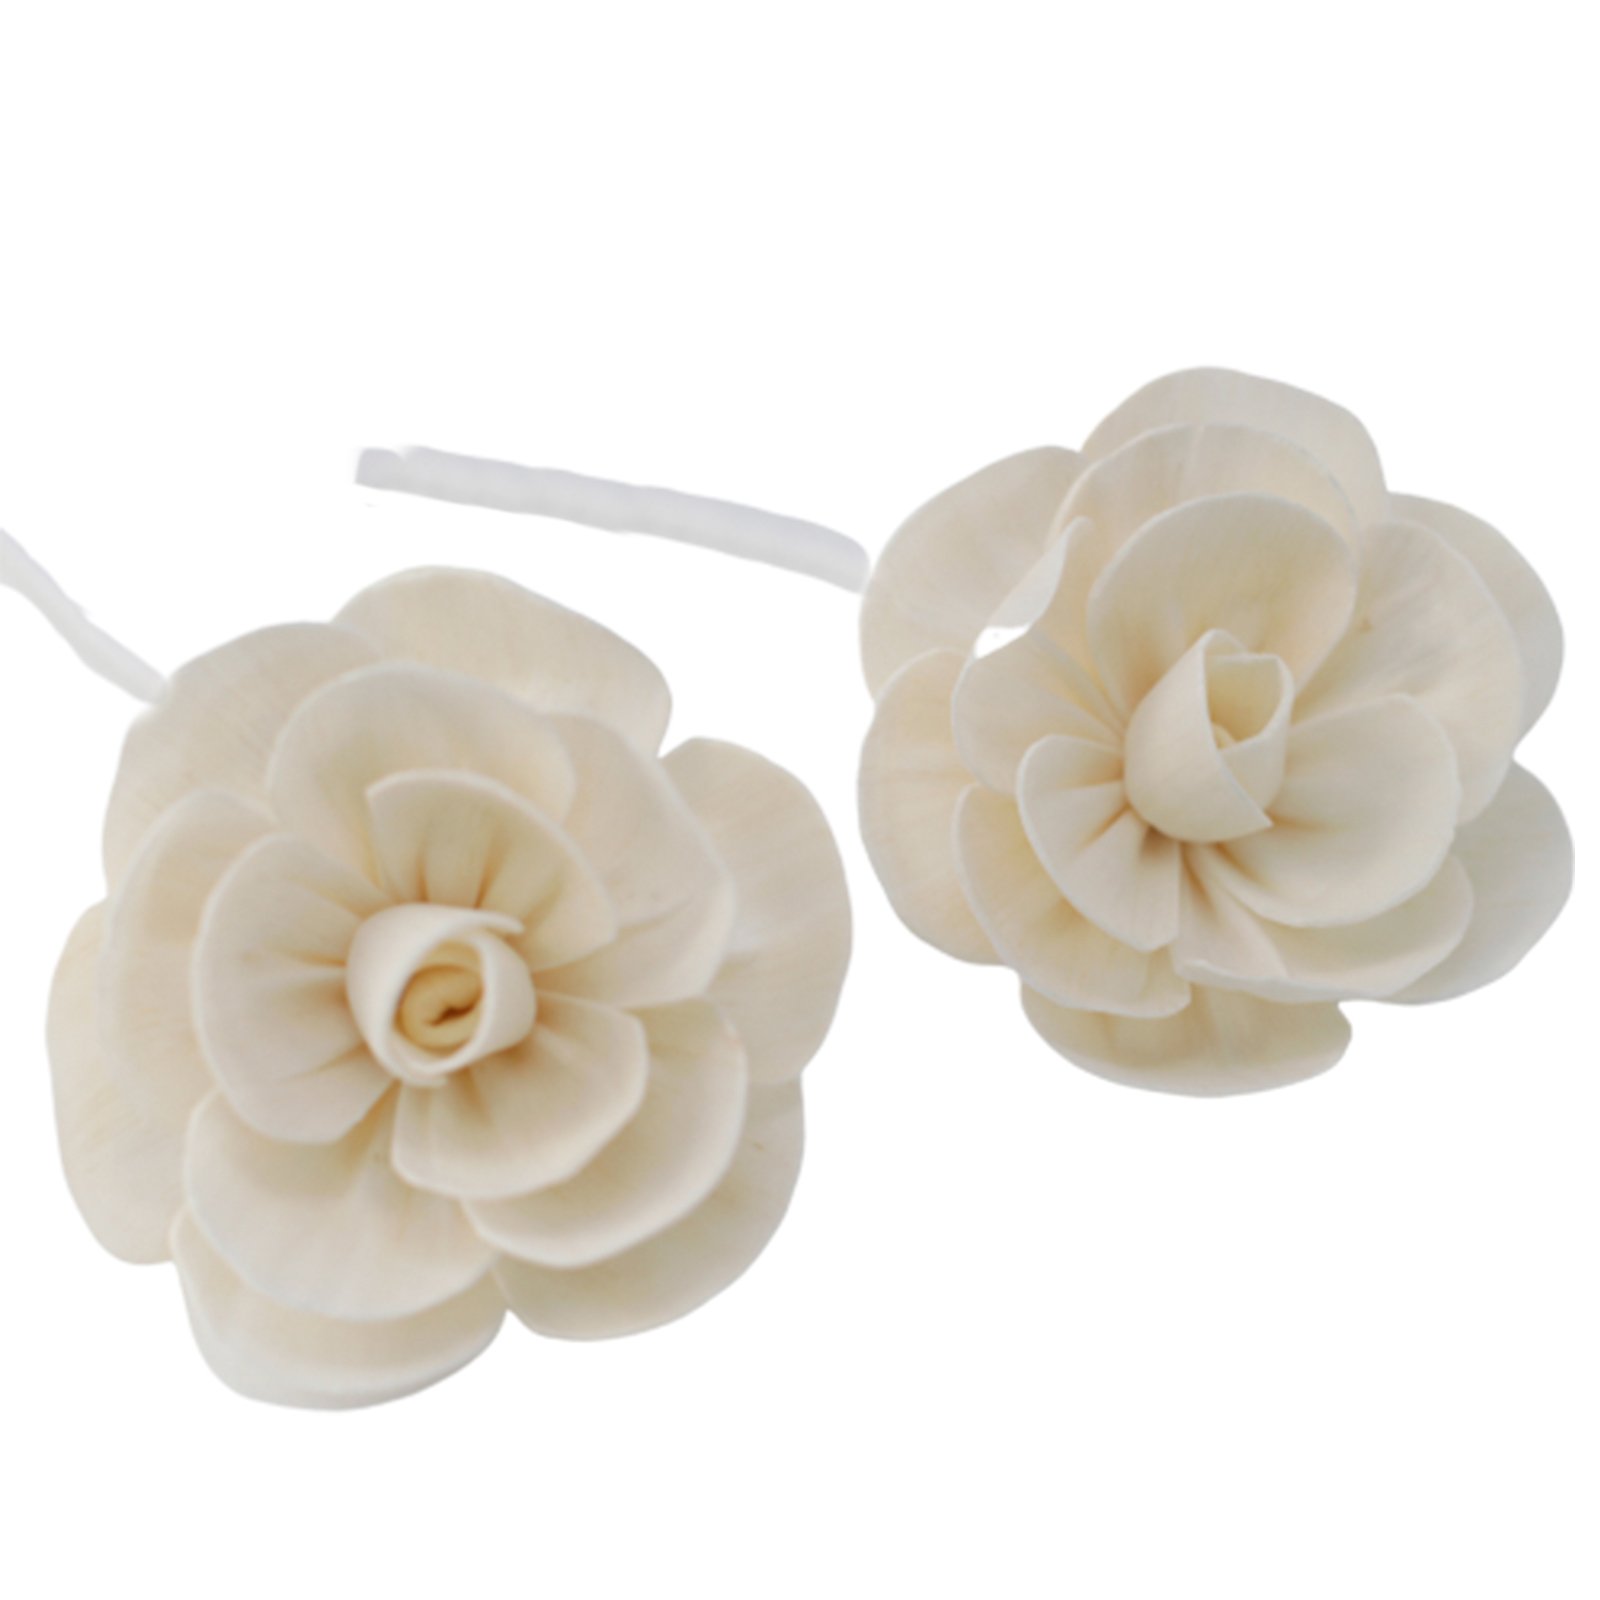 Natural Diffuser Flowers - Large Lotus on String